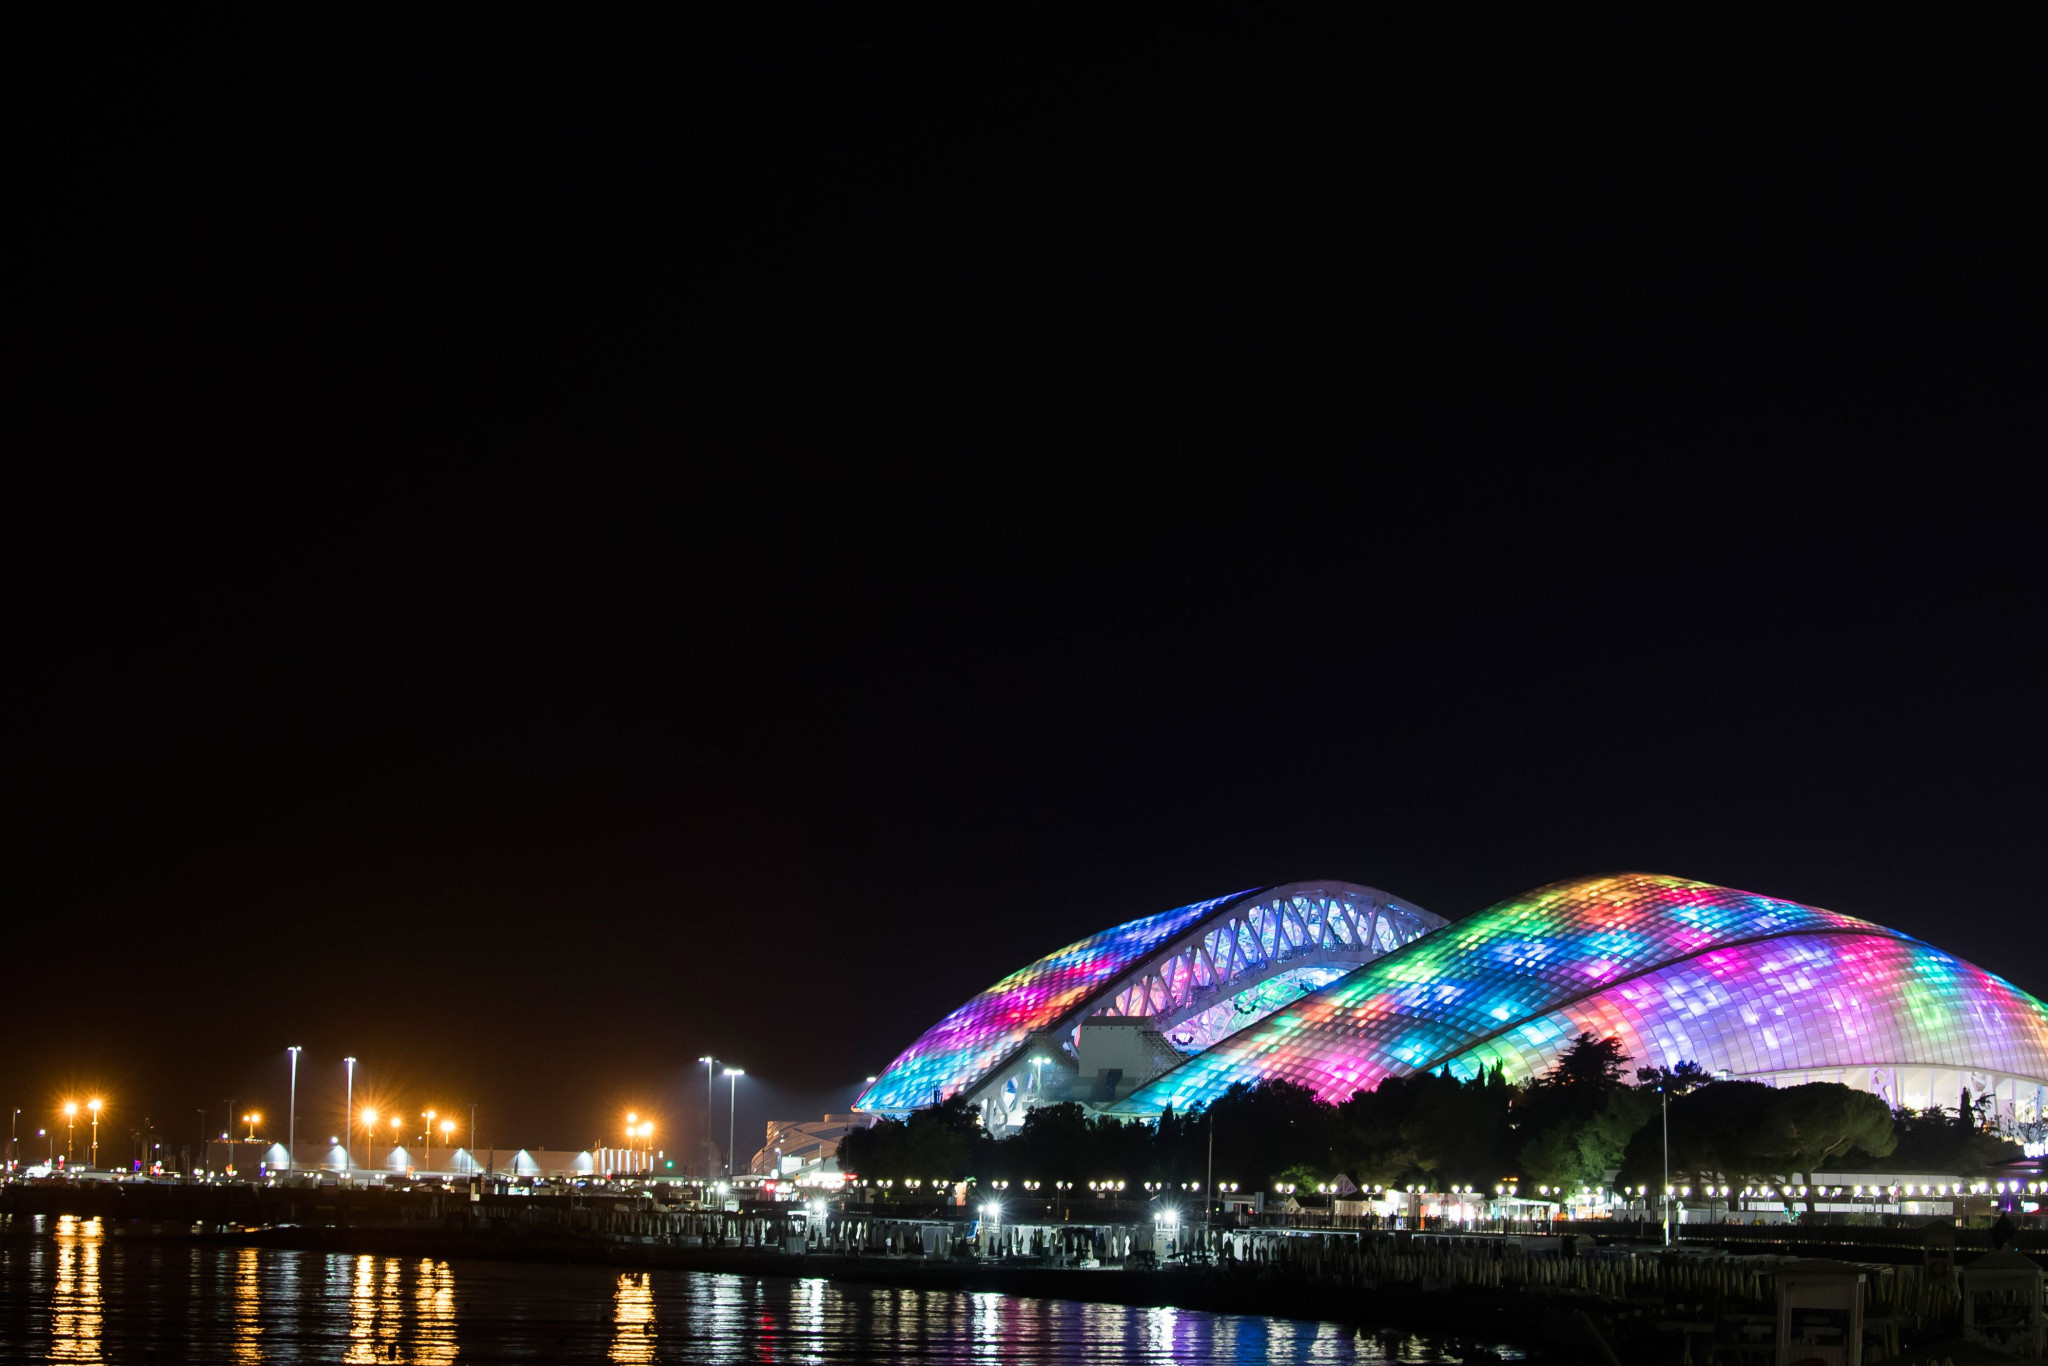 The RIOU is in Sochi, which hosted the 2014 Winter Olympics ©Getty Images